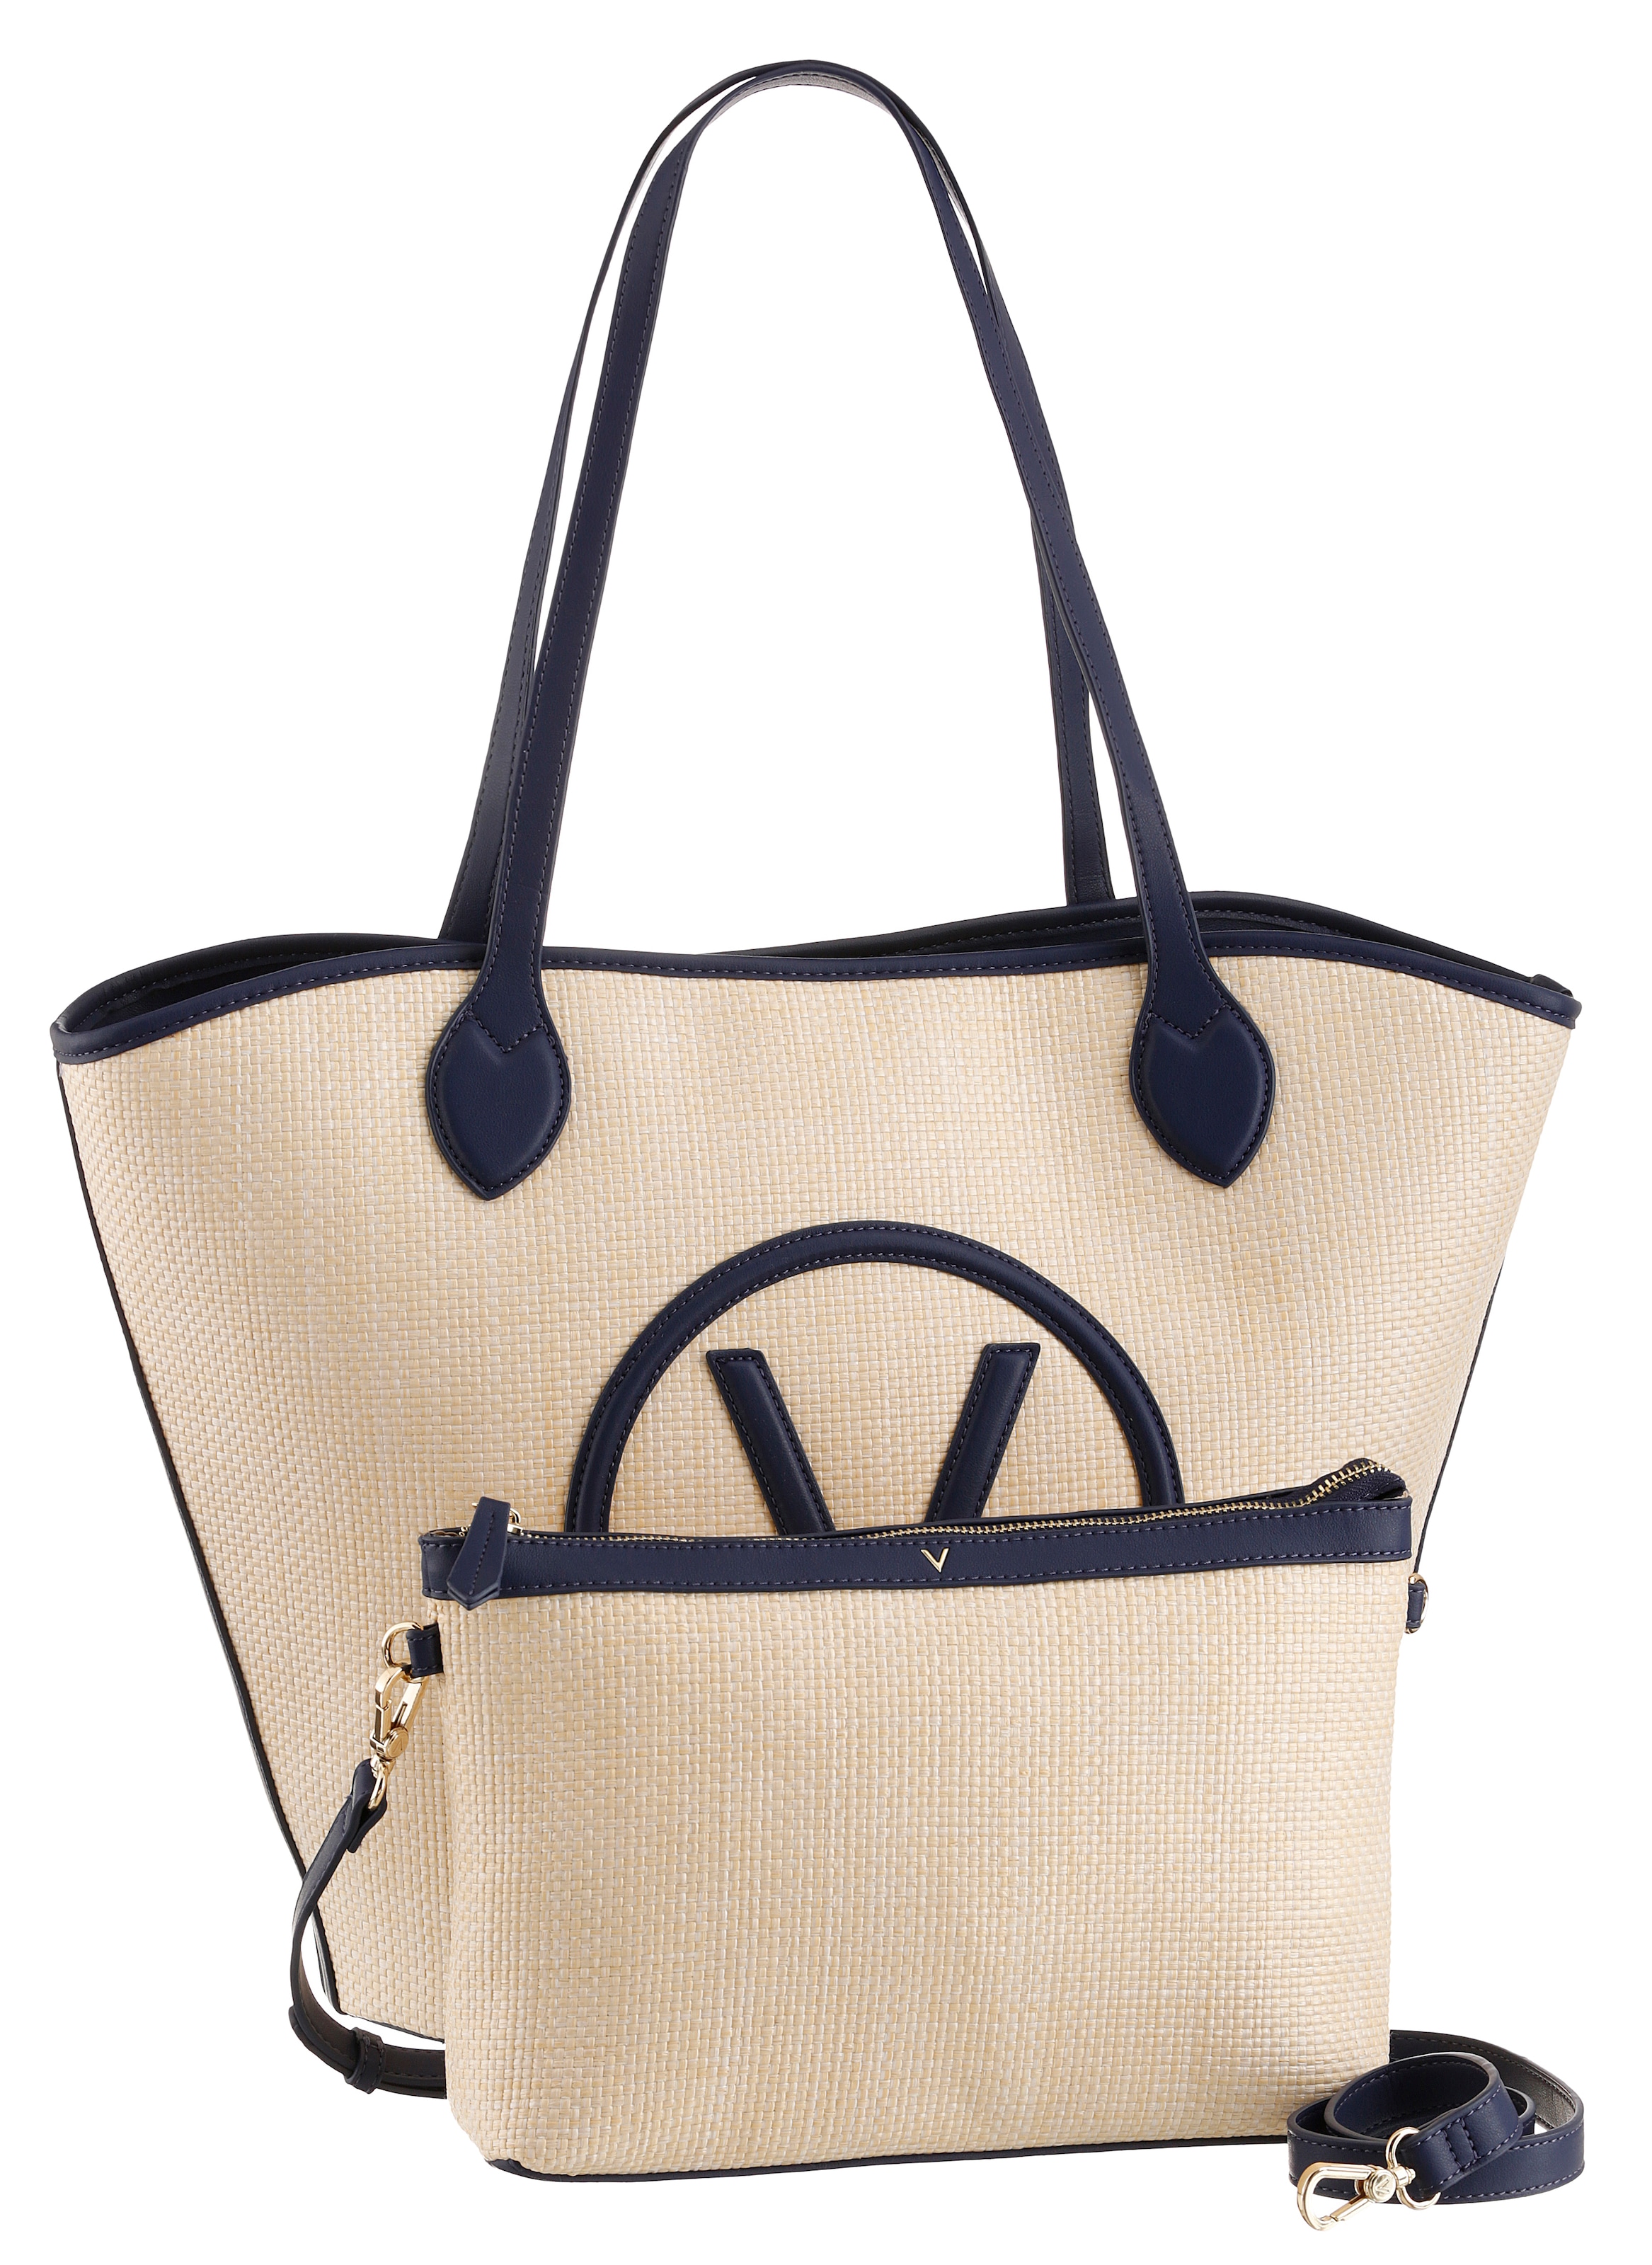 VALENTINO BAGS Shopper »INWOOD RE«